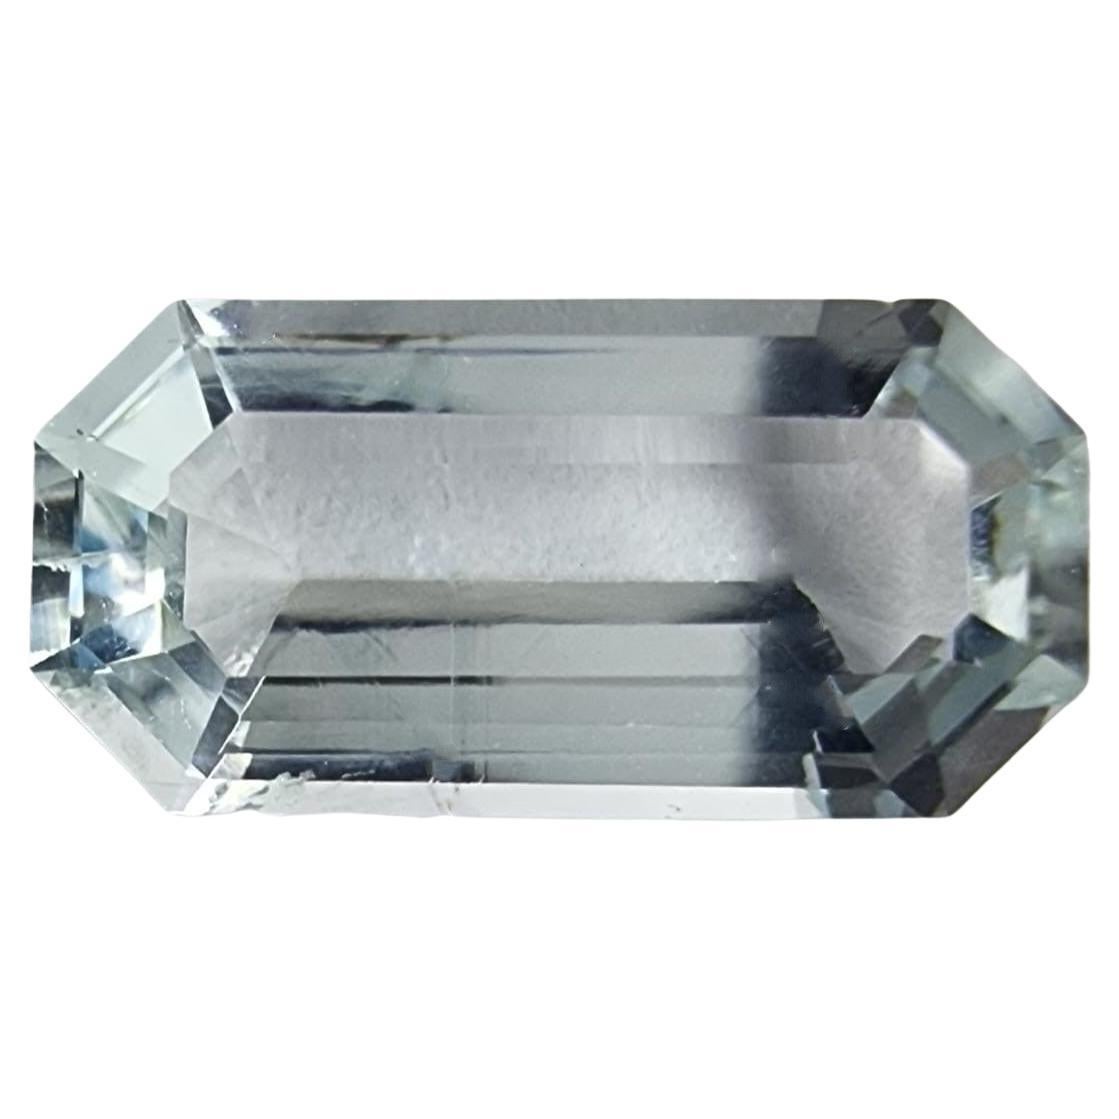 Introducing our exquisite 2.83-carat Emerald Cut Natural Greenish Blue Aquamarine Gemstone, a mesmerizing piece that exudes elegance and sophistication. This stunning gemstone features a captivating greenish-blue hue reminiscent of tranquil ocean